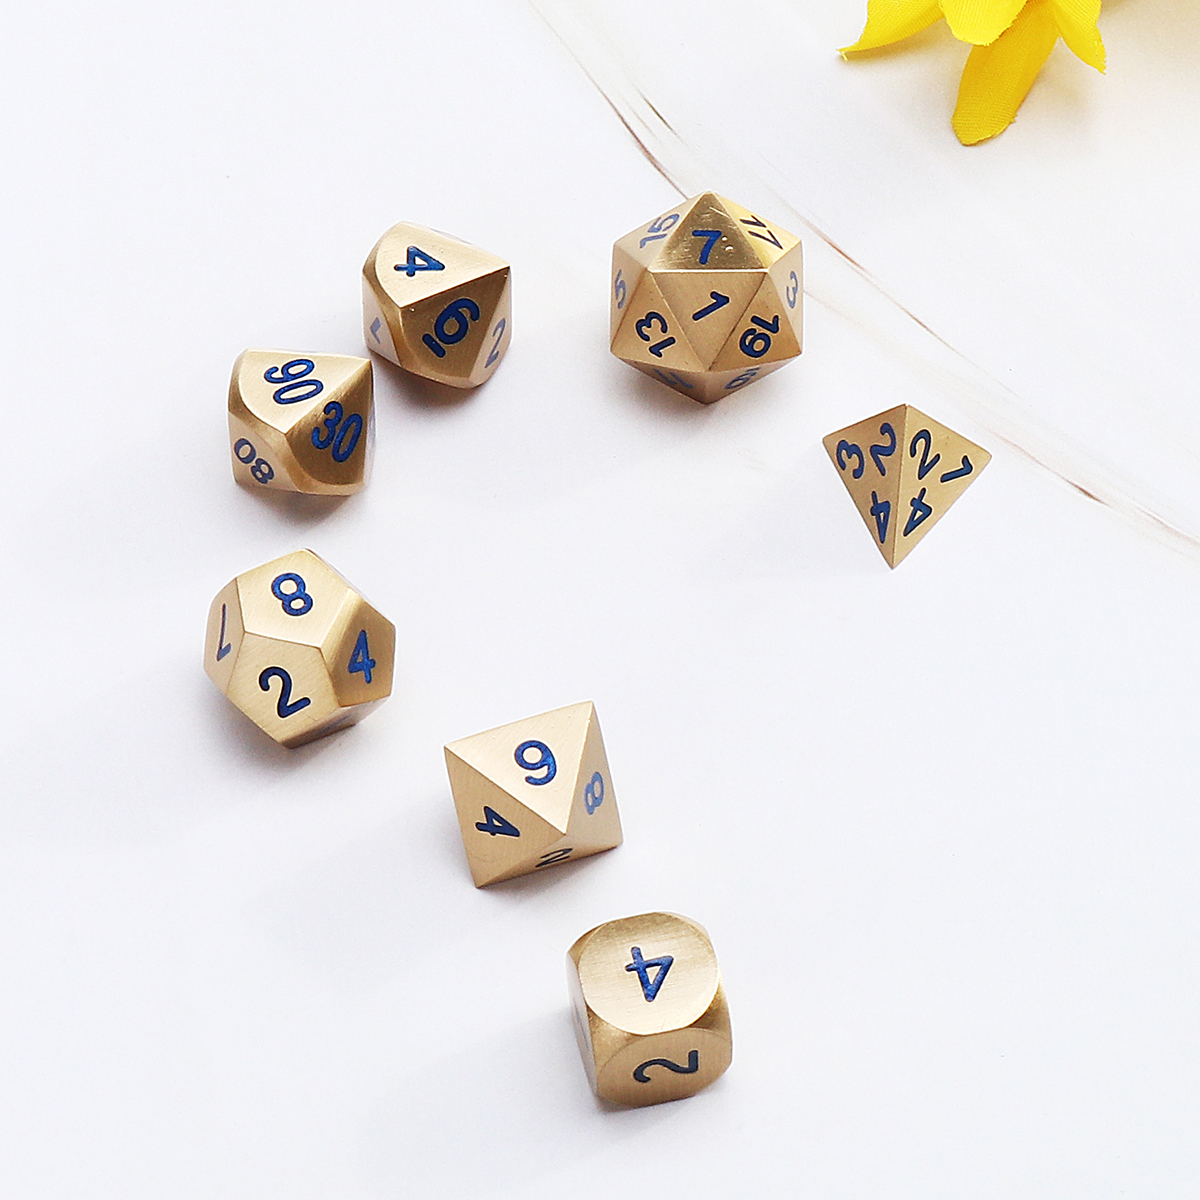 Pure-Copper-Polyhedral-Dices-Set-Metal-Role-Playing-Game-Dice-Gadget-for-Dungeons-Dragon-Games-Gift-1608120-3